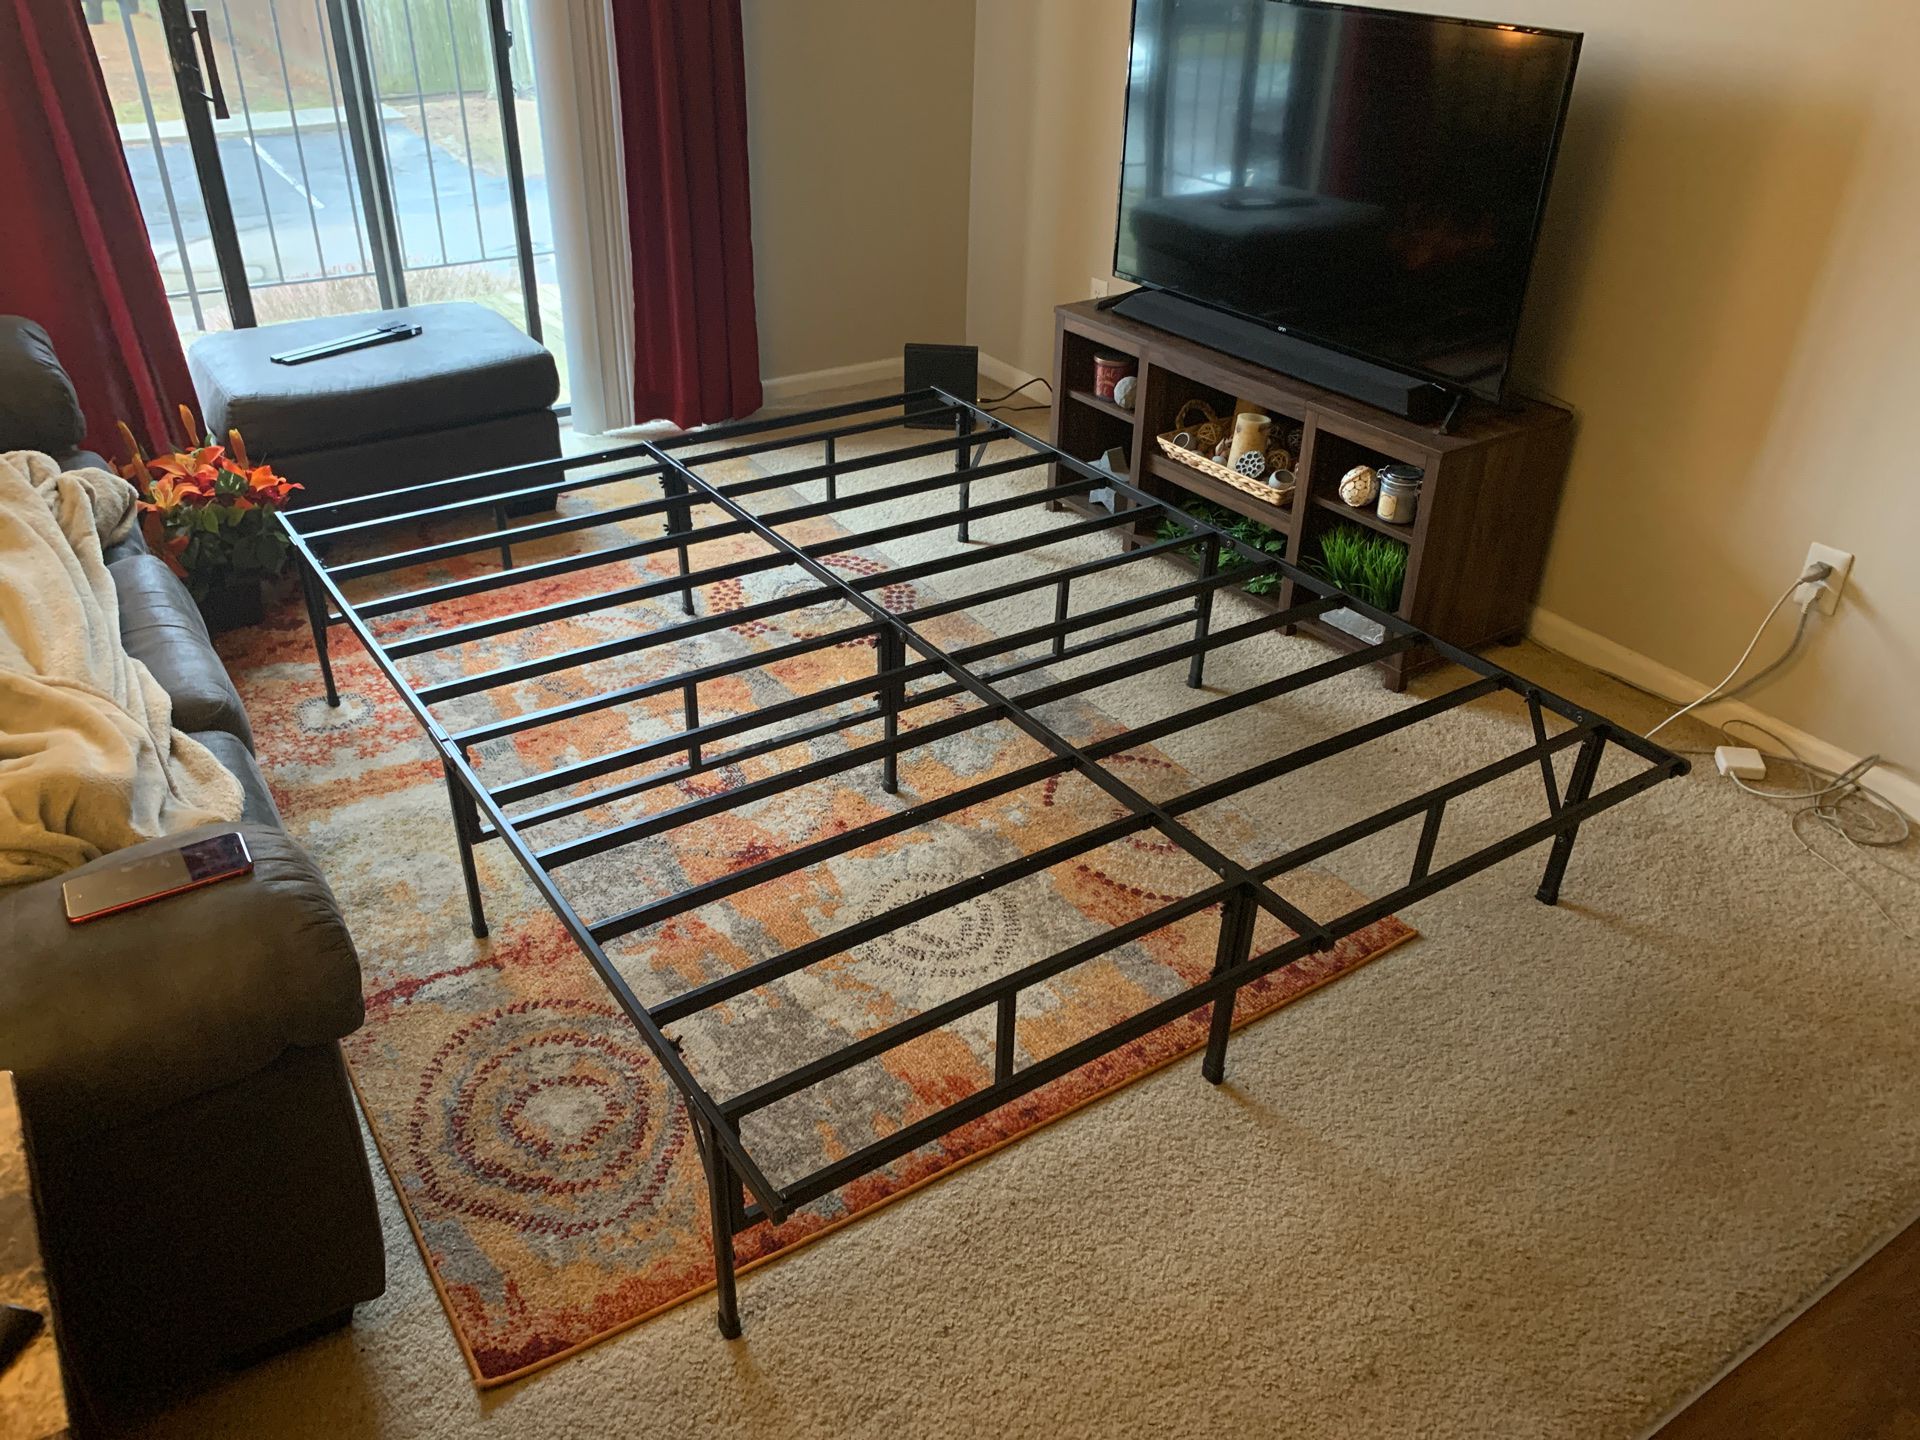 Queen bed frame -foldable